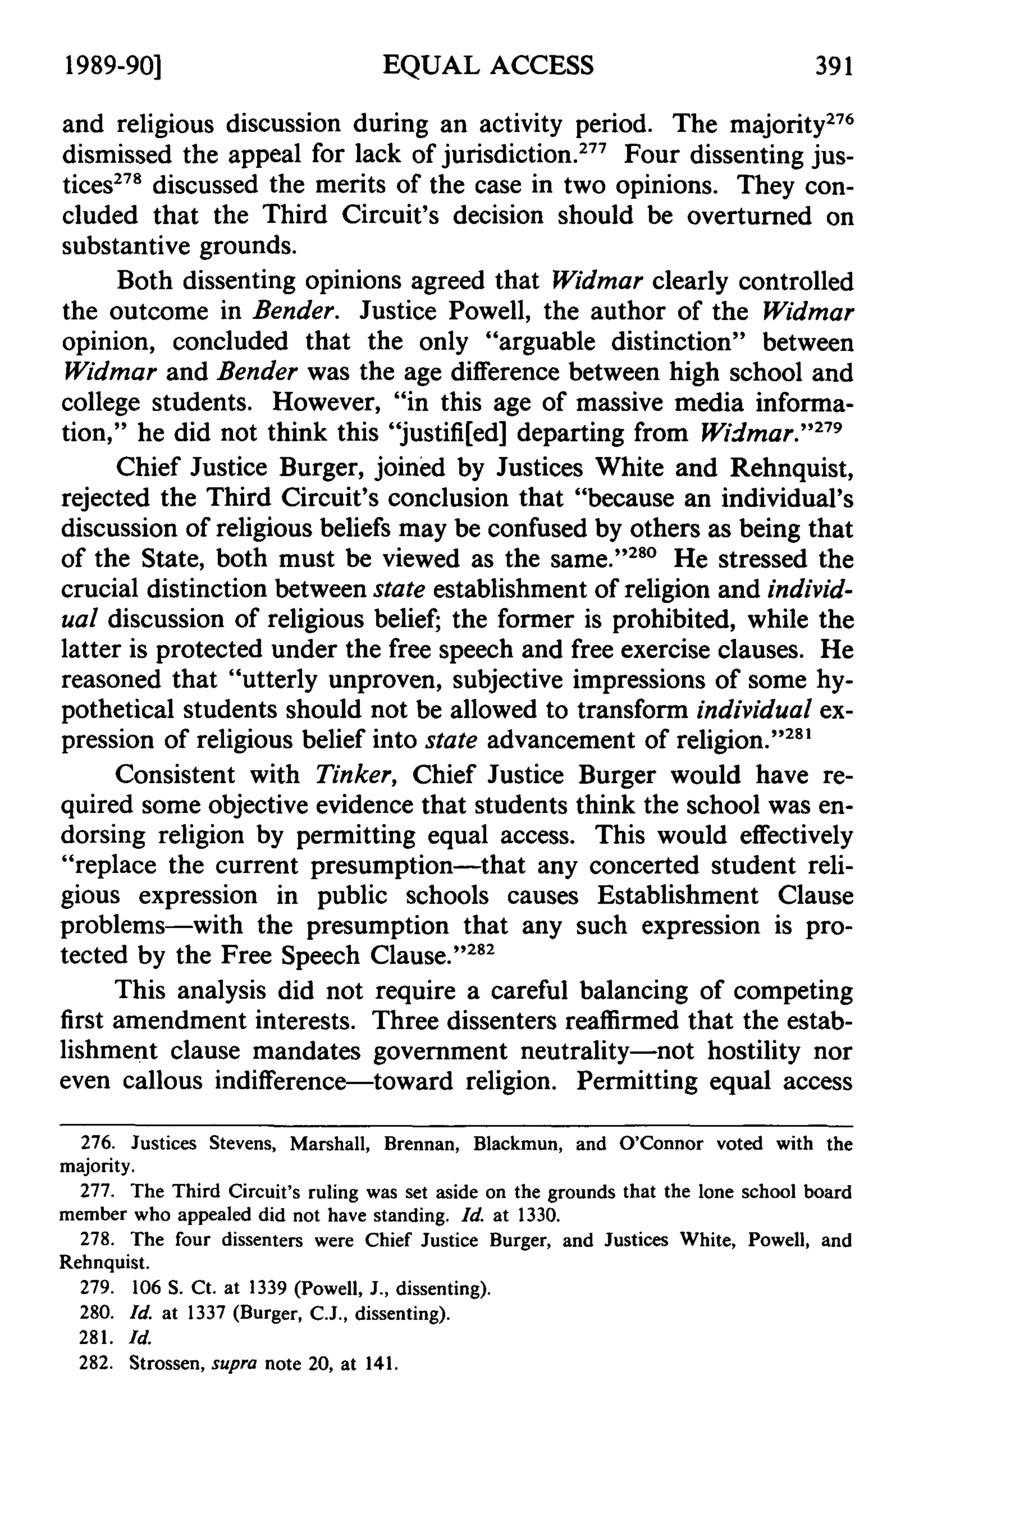 1989-90] EQUAL ACCESS and religious discussion during an activity period. The majority 276 dismissed the appeal for lack of jurisdiction.